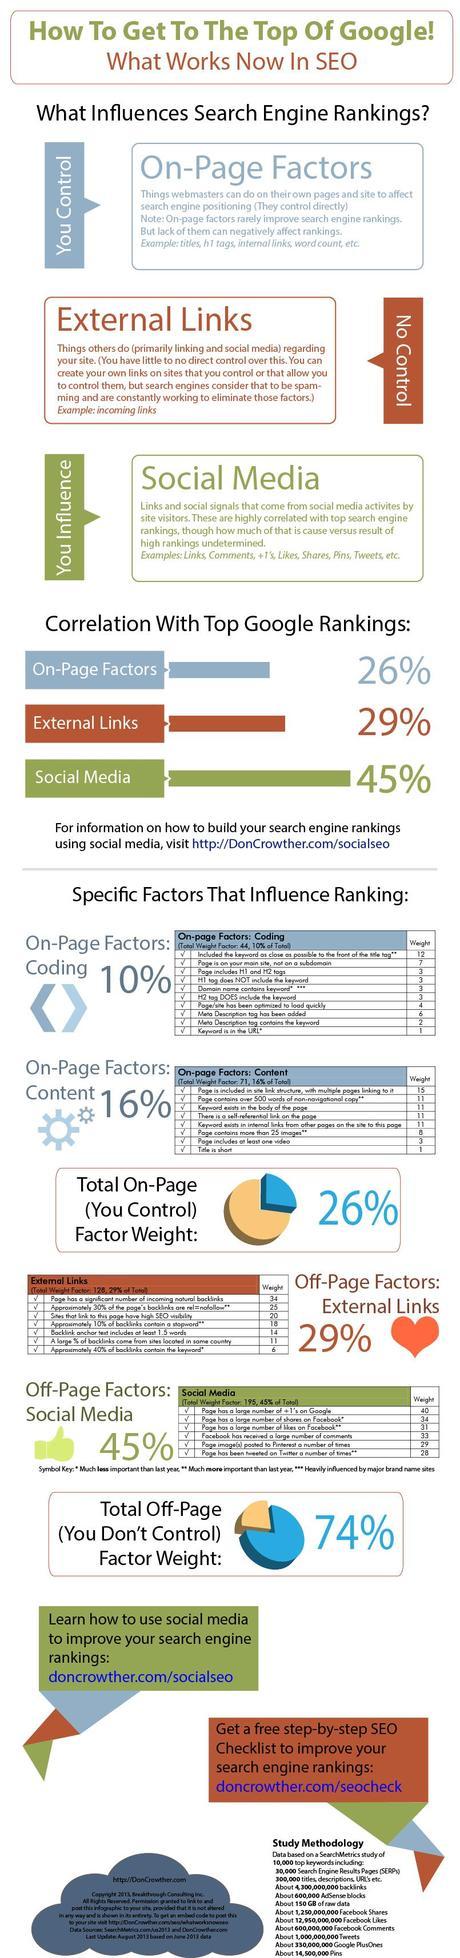 How To Get To The Top Of The Google Rankings â€“ SEO Infographic - An Infographic from DonCrowther.com